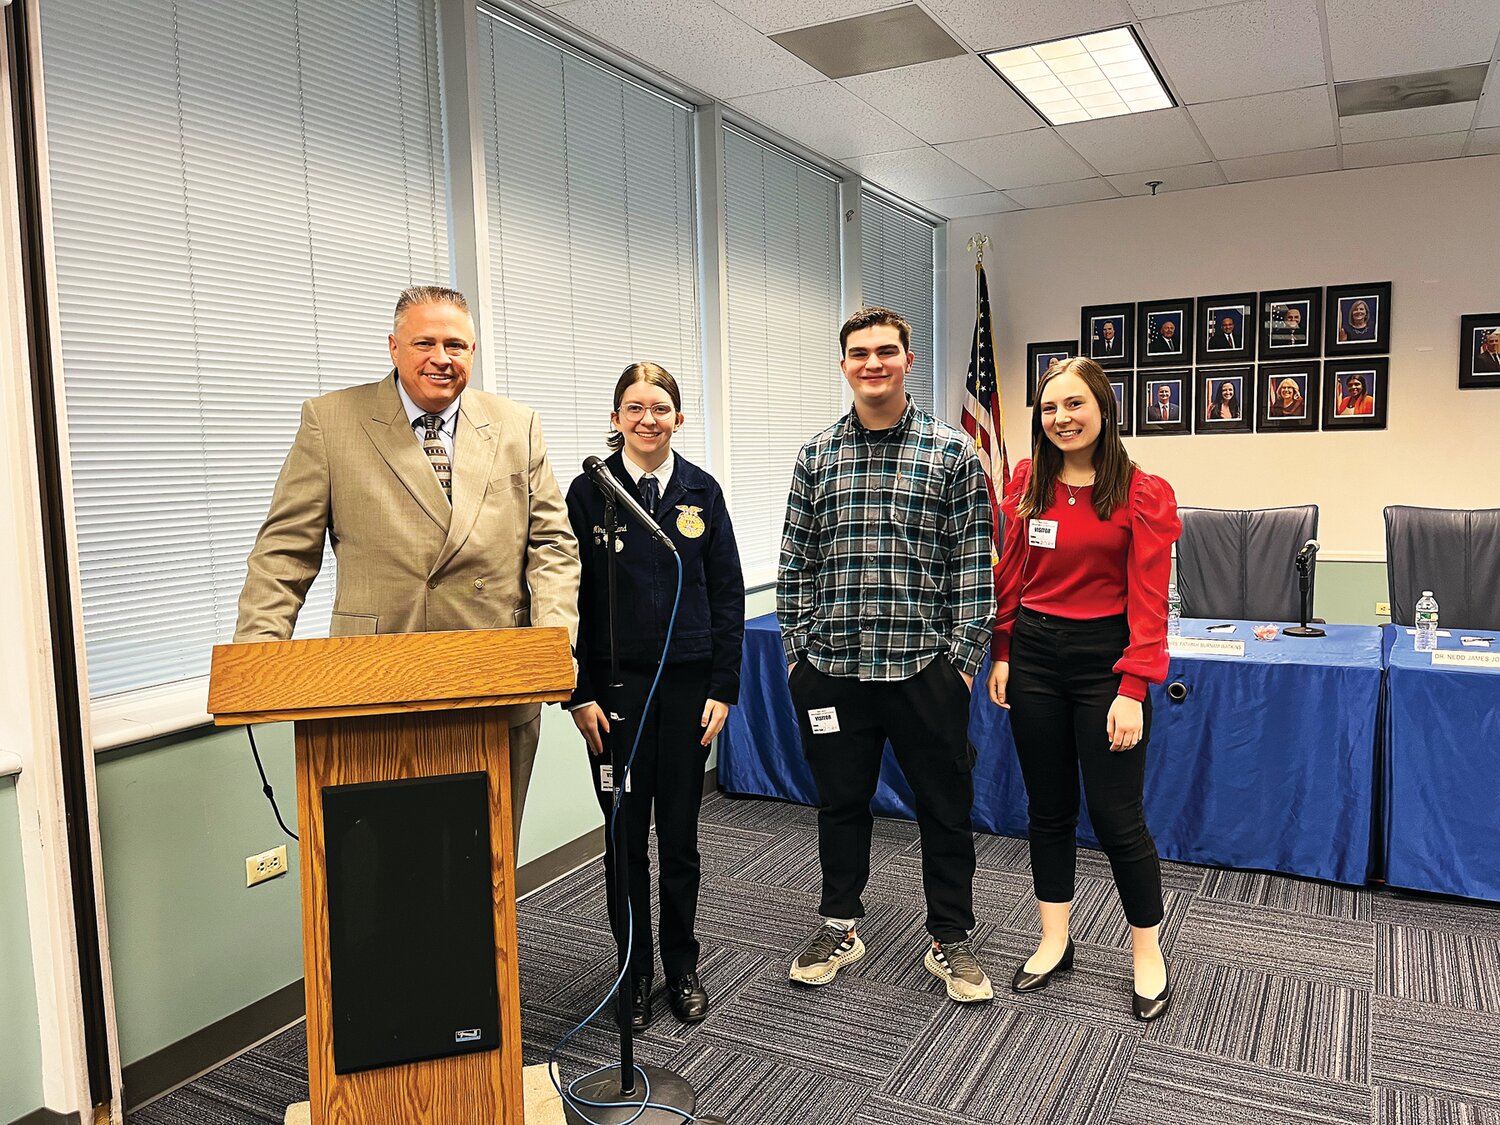 Hunterdon County Vocational School District Superintendent Dr. Todd Bonsall is joined by students Nina Weiland, Zach Gillespie and Ally Kusmiesz for the opportunity to present in front of the New Jersey State Board of Education to highlight the value of career-focused high school education.